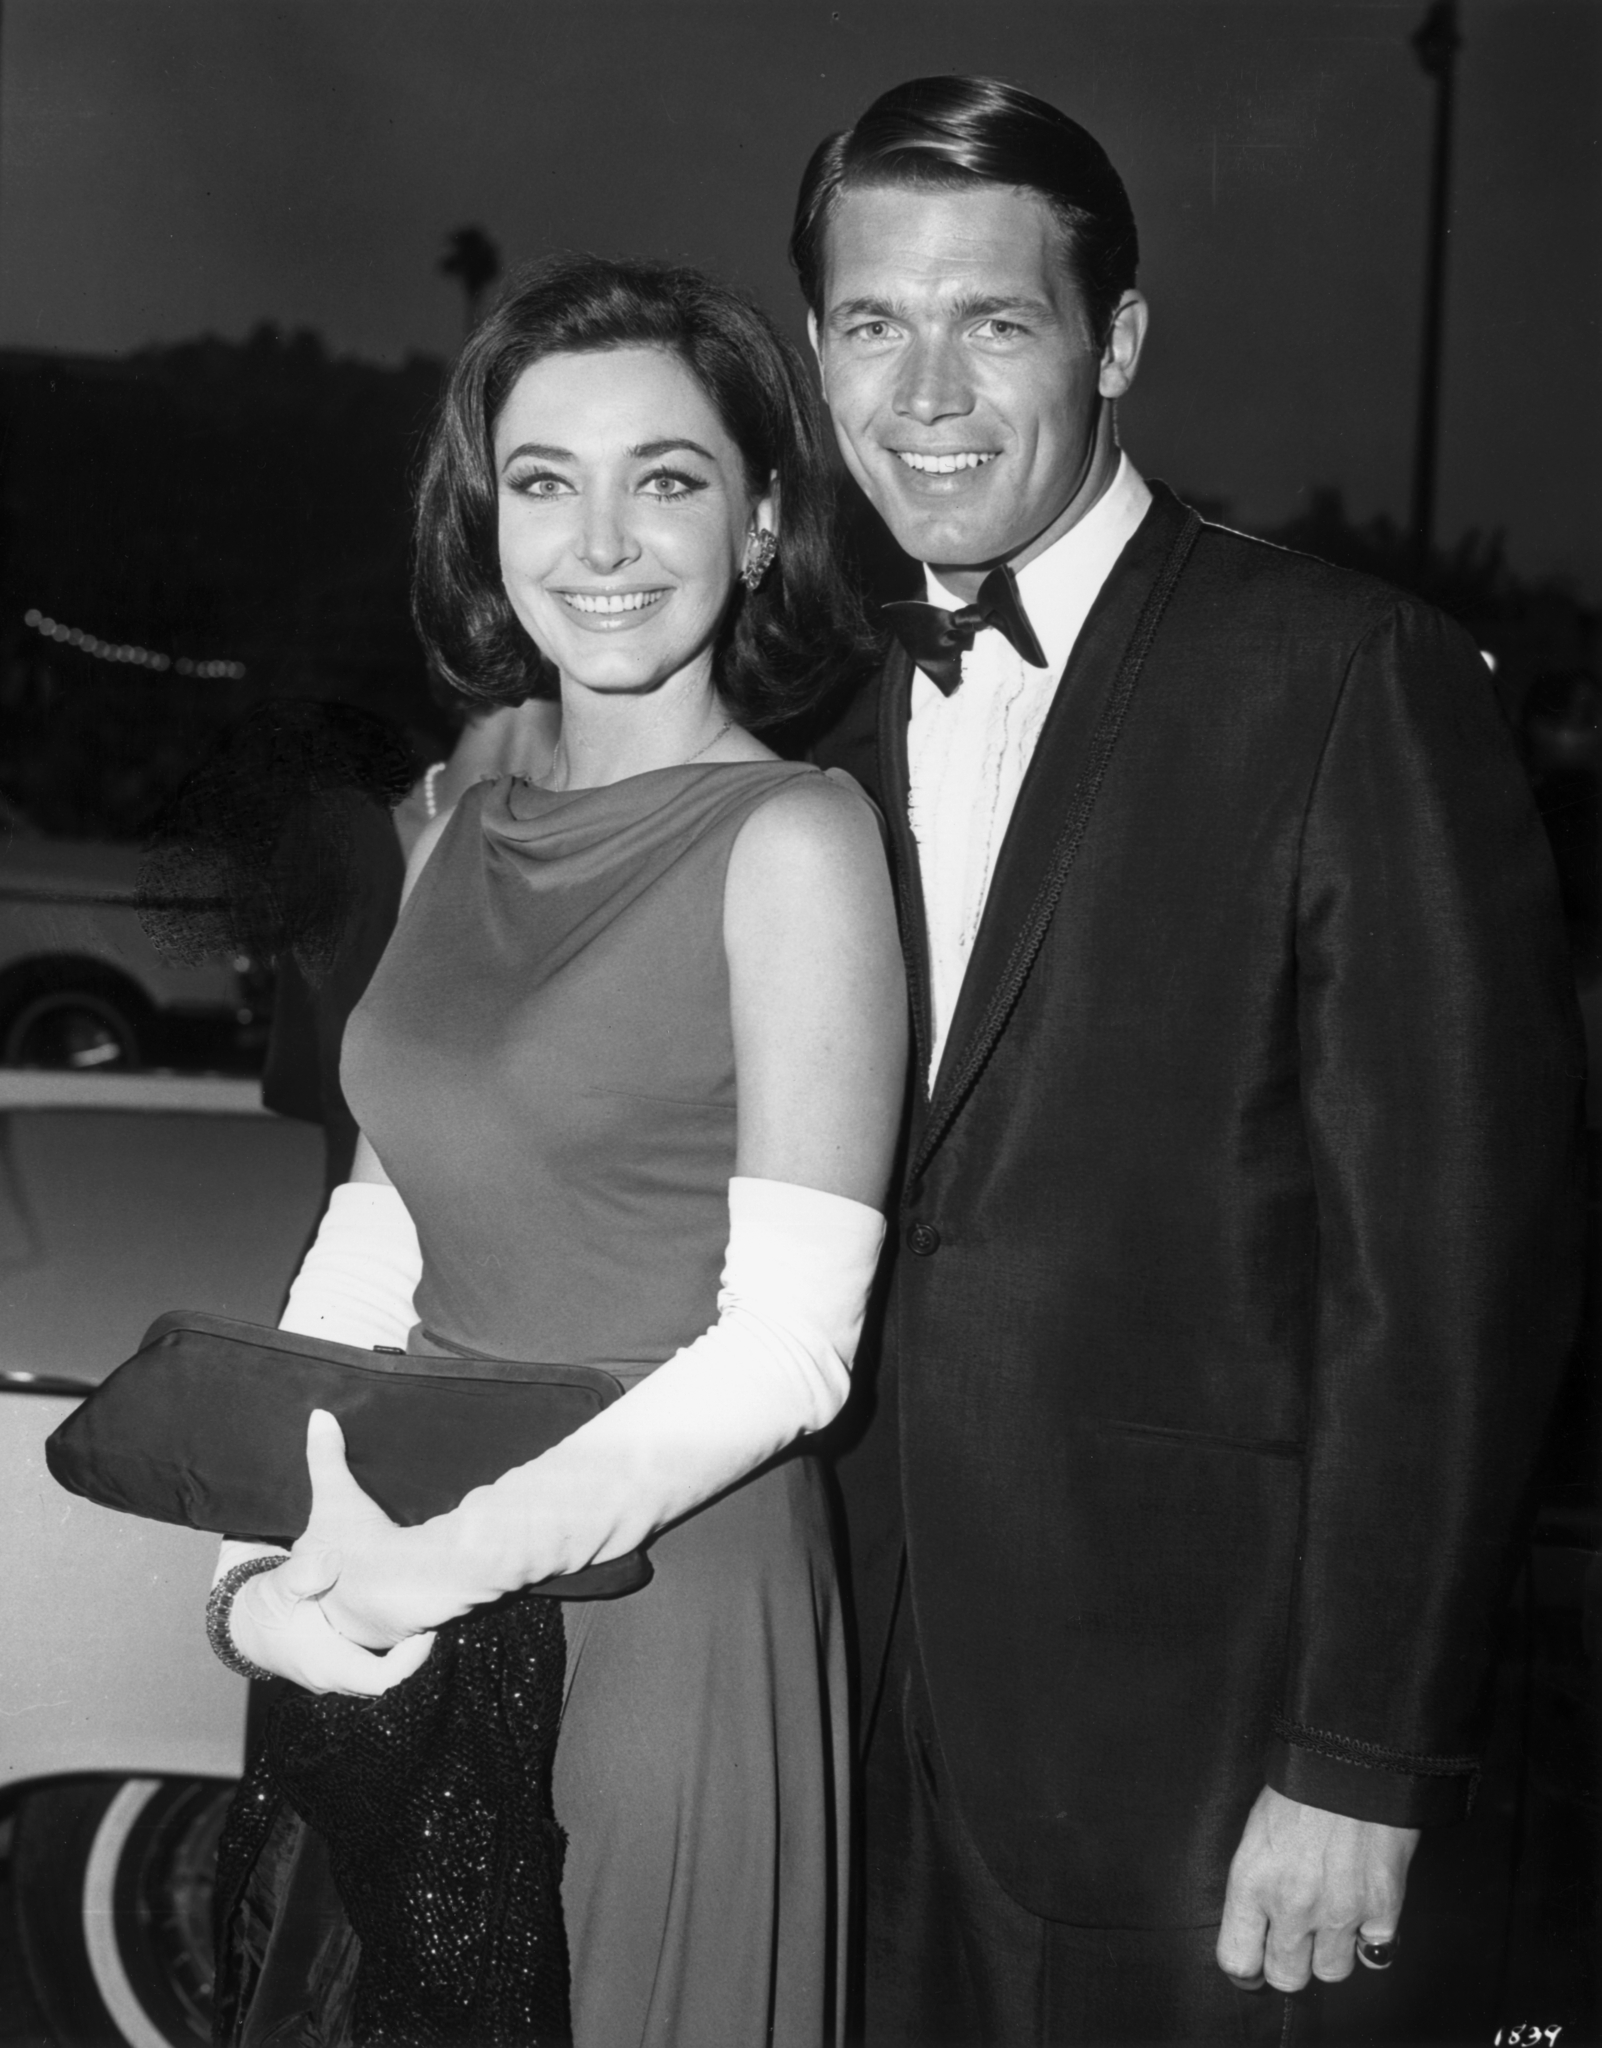 Chad Everett and Shelby Grant